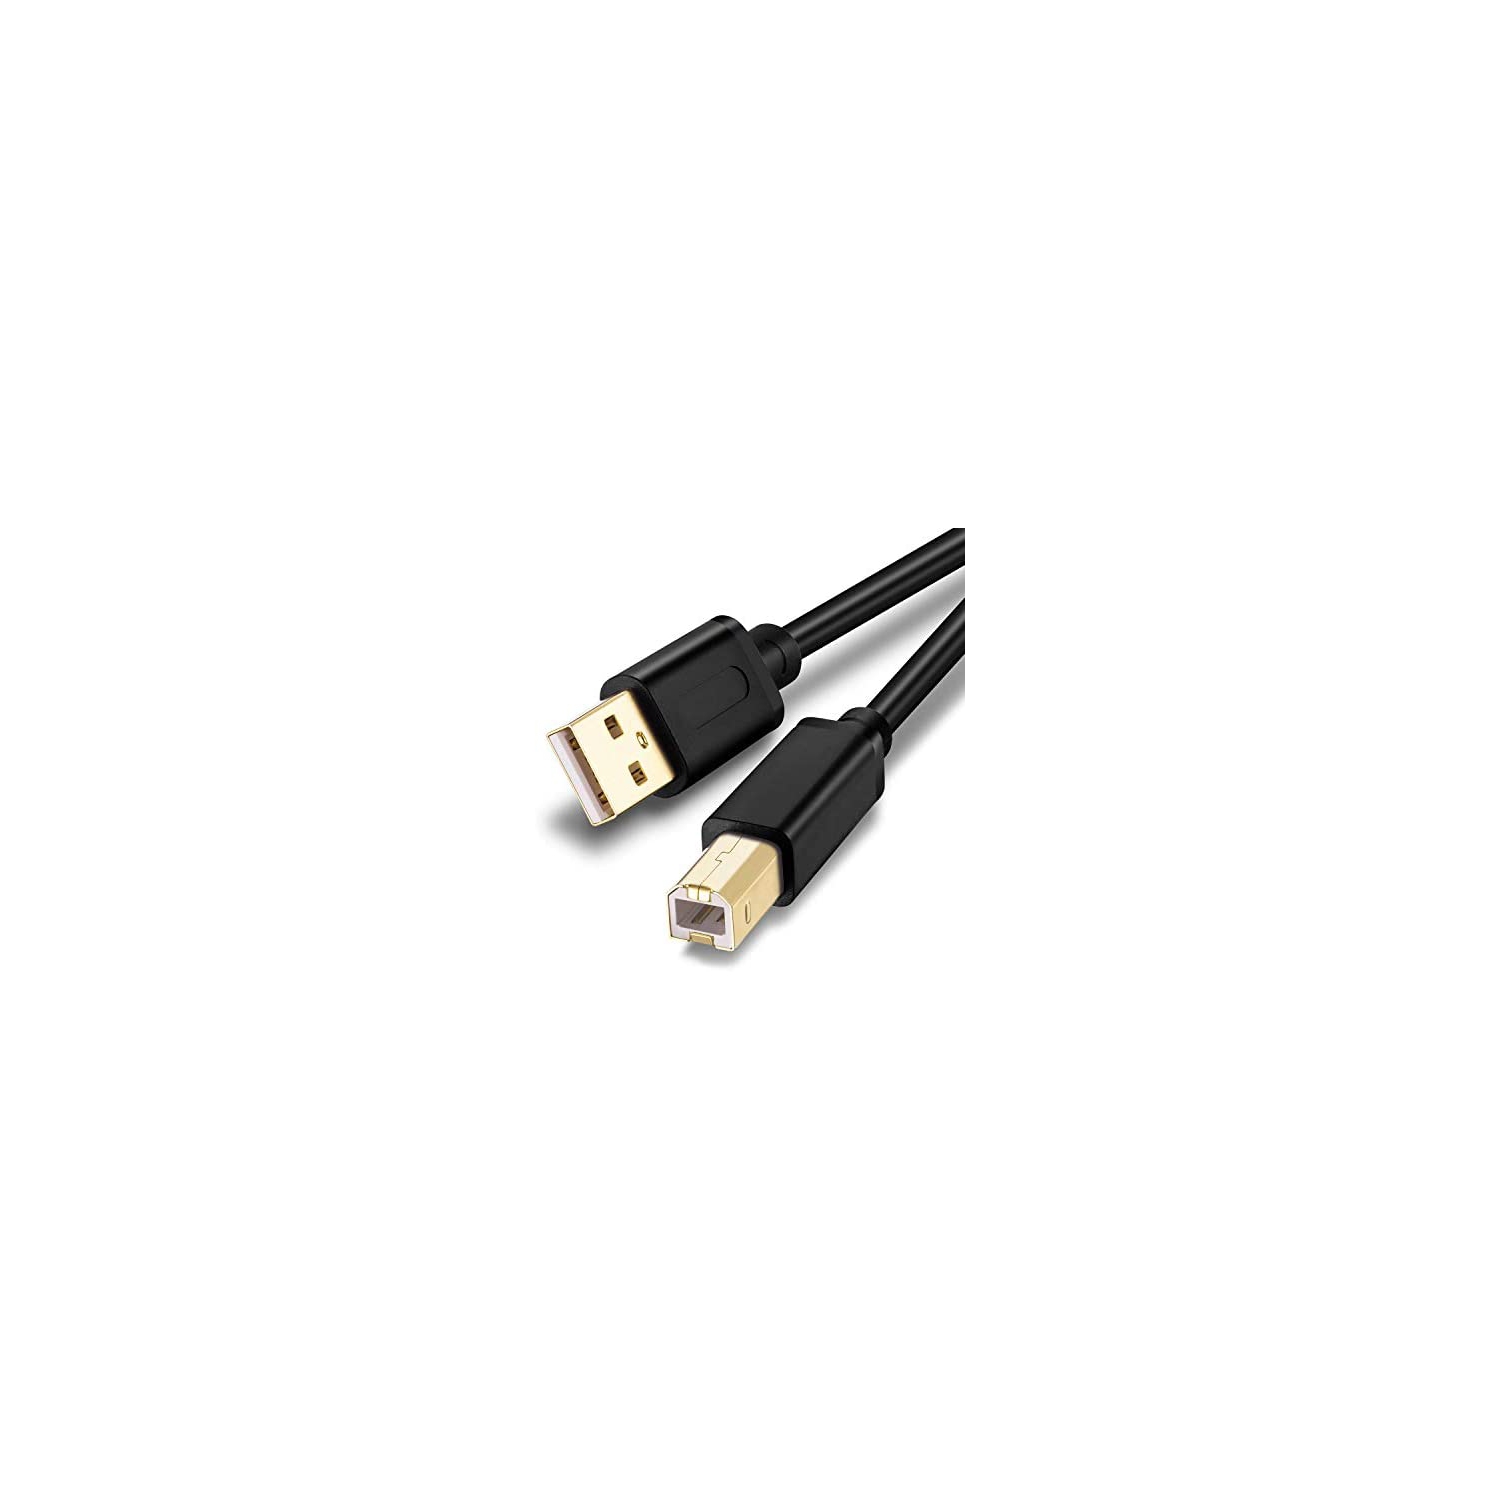 Printer Cable 6Ft,Black Color USB Printer Cable USB 2.0 Type A Male to B Male Scanner Cord High Speed for Brother, HP,